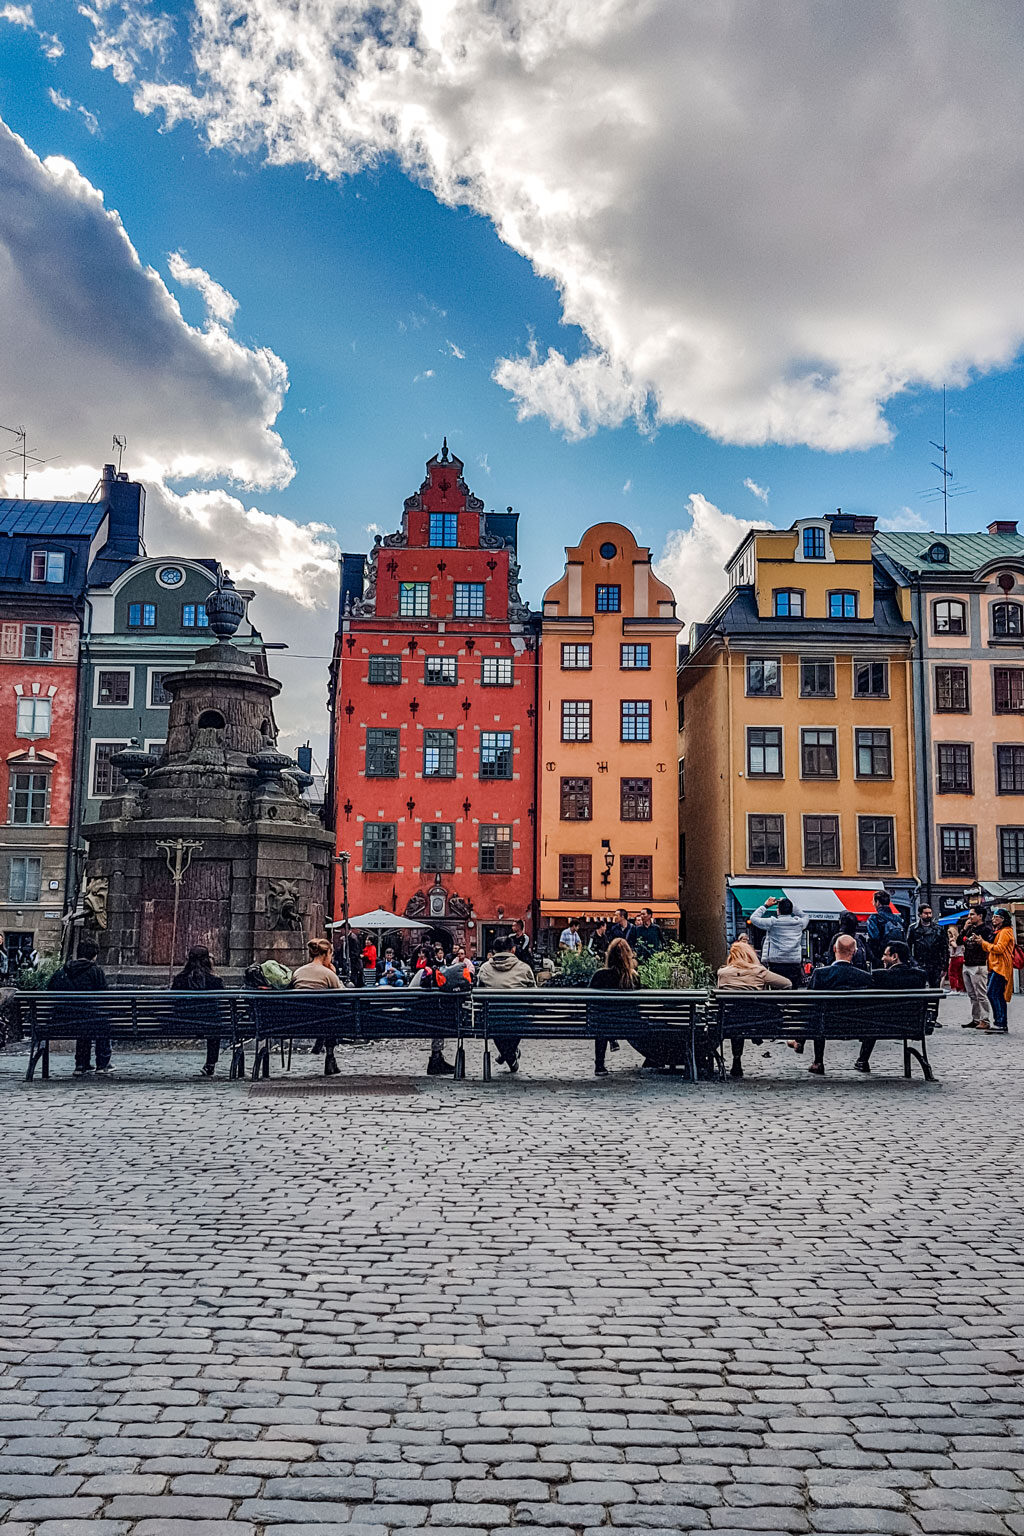 Main Square of the Gamla Stan (Old Town Stockholm)